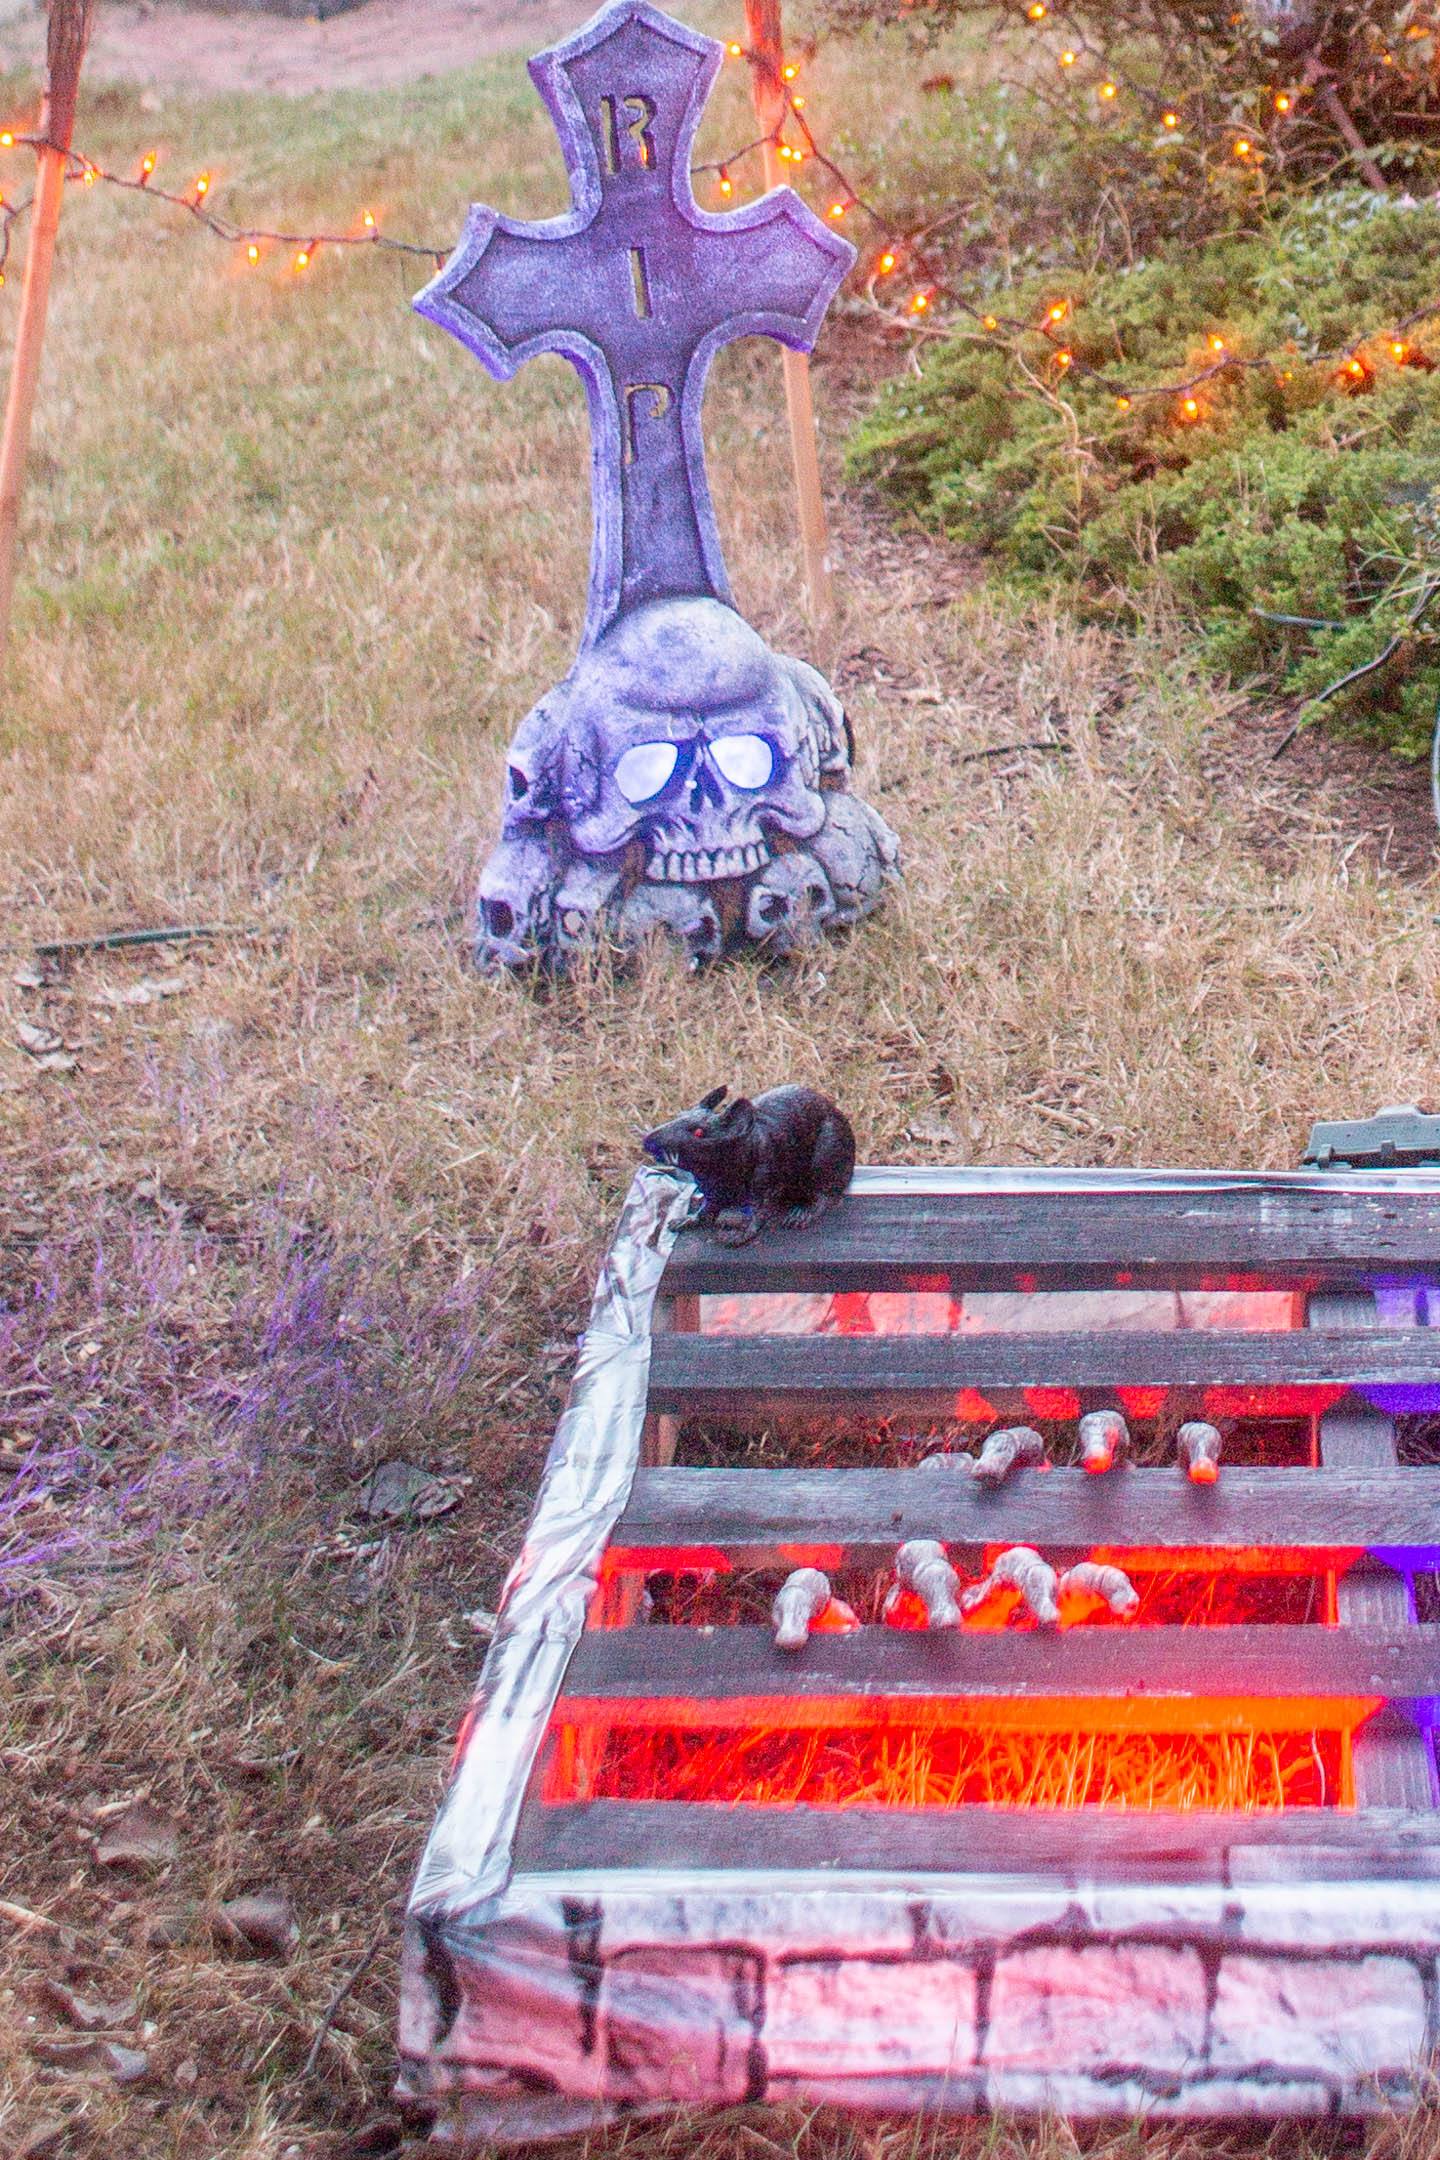 Fake rat sitting on a dungeon prop in a Halloween graveyard